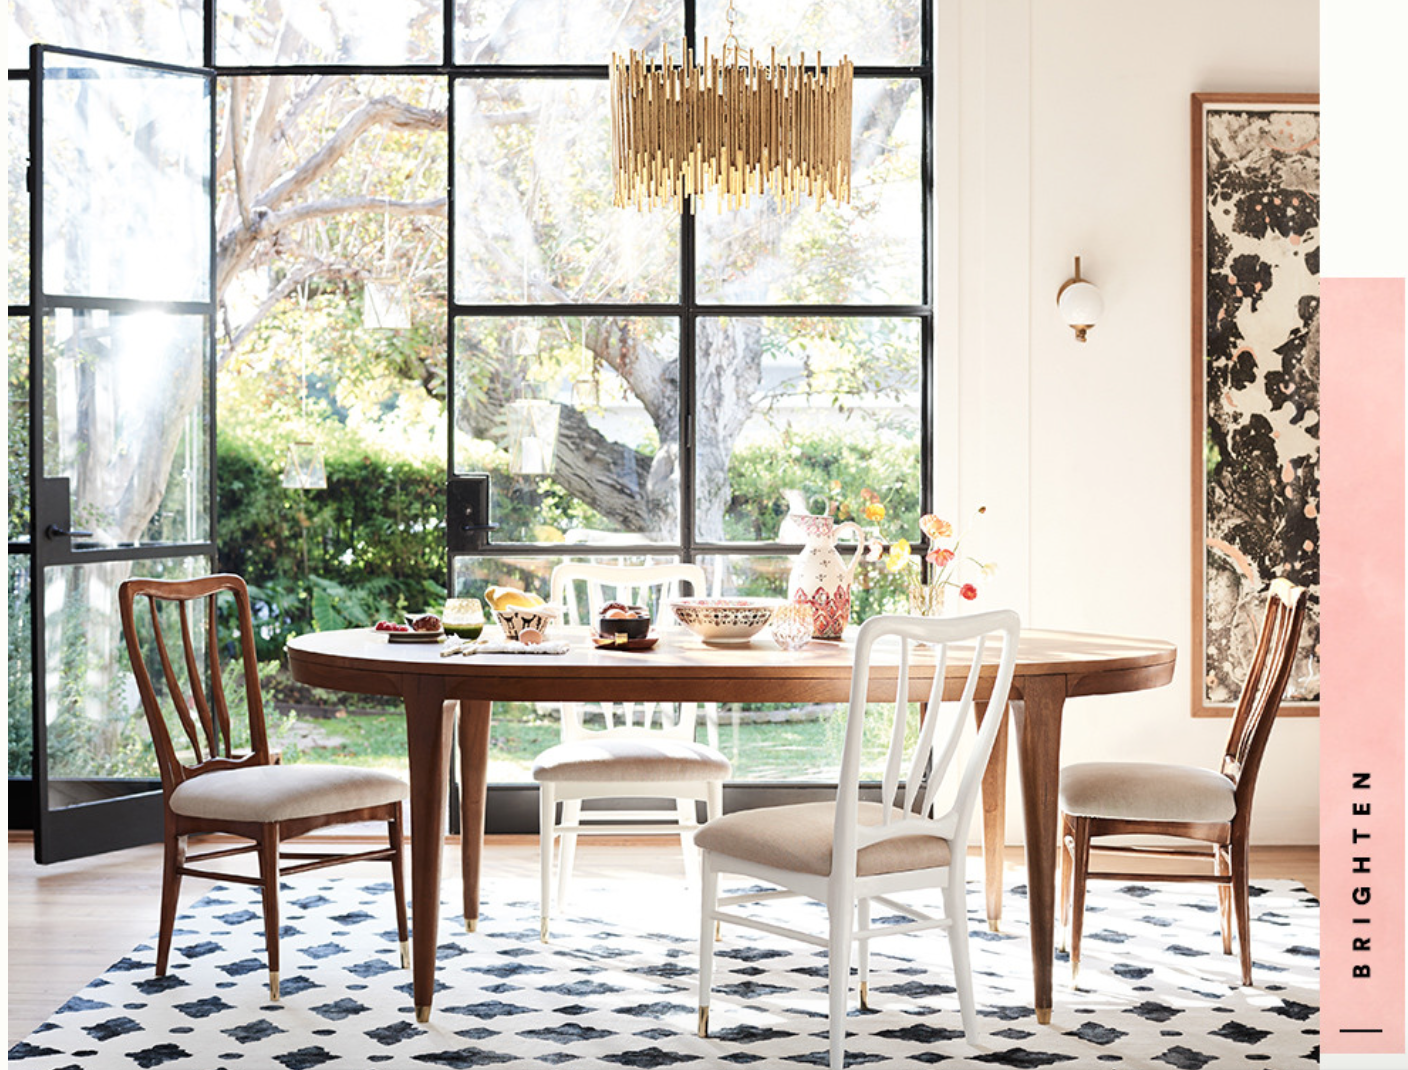 Anthropologie's Spring Home Collection is Here | Kayla Lynn